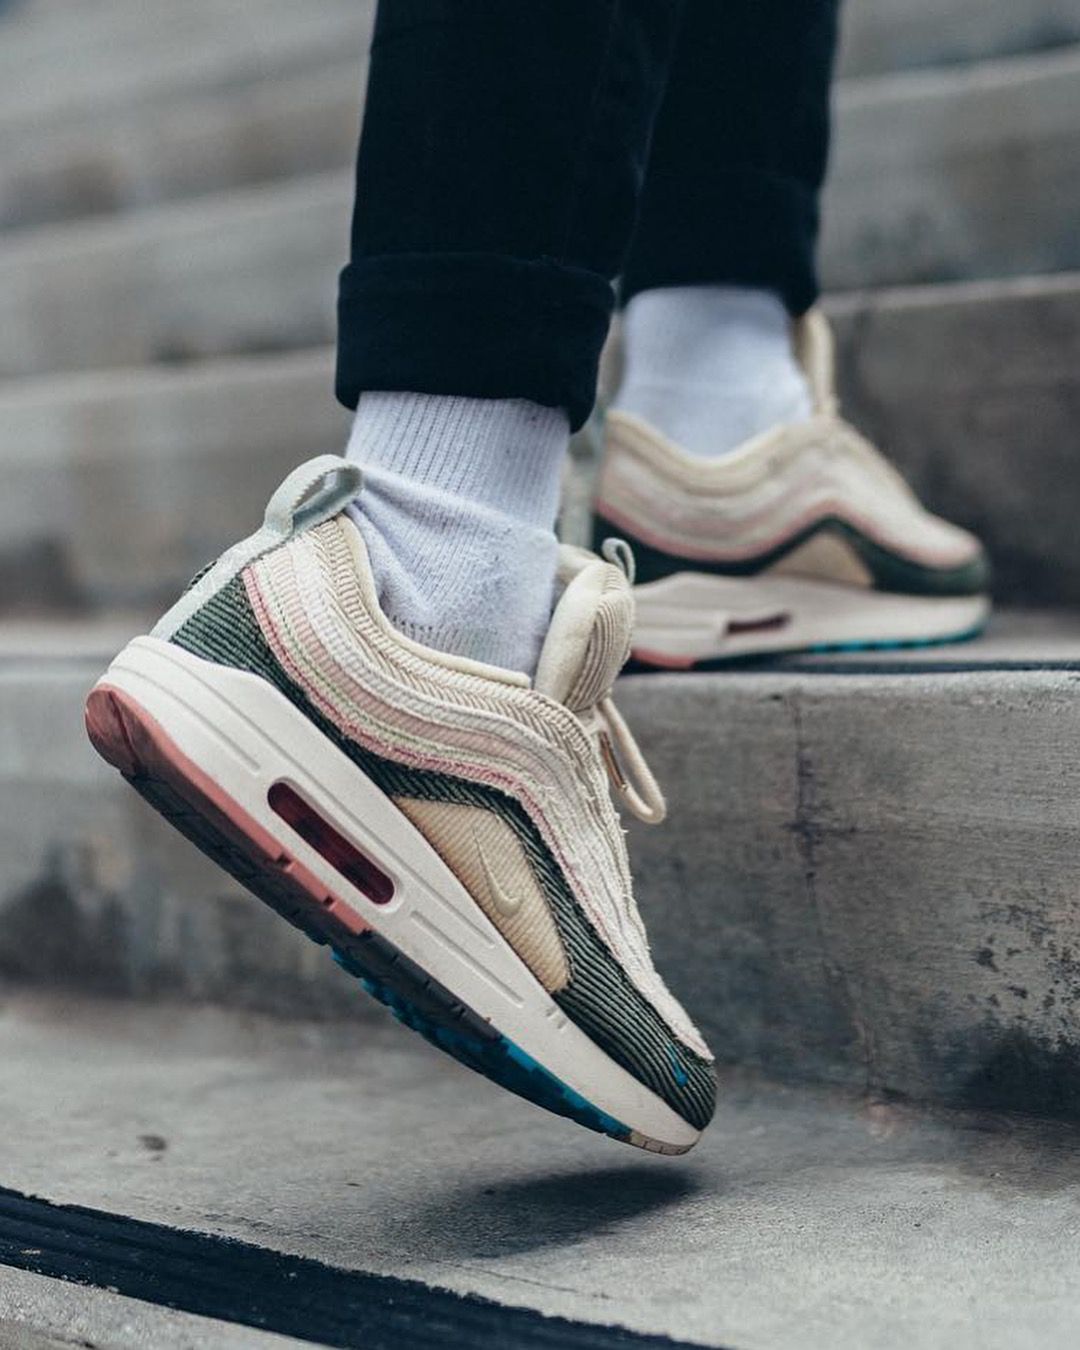 Fanático apertura educar The Drop Date on Twitter: "Take a look at this custom BLEACHED pair of the  SEAN WOTHERSPOON X NIKE AIR MAX 1/97... What are your thoughts on this  custom❓ Image courtesy of